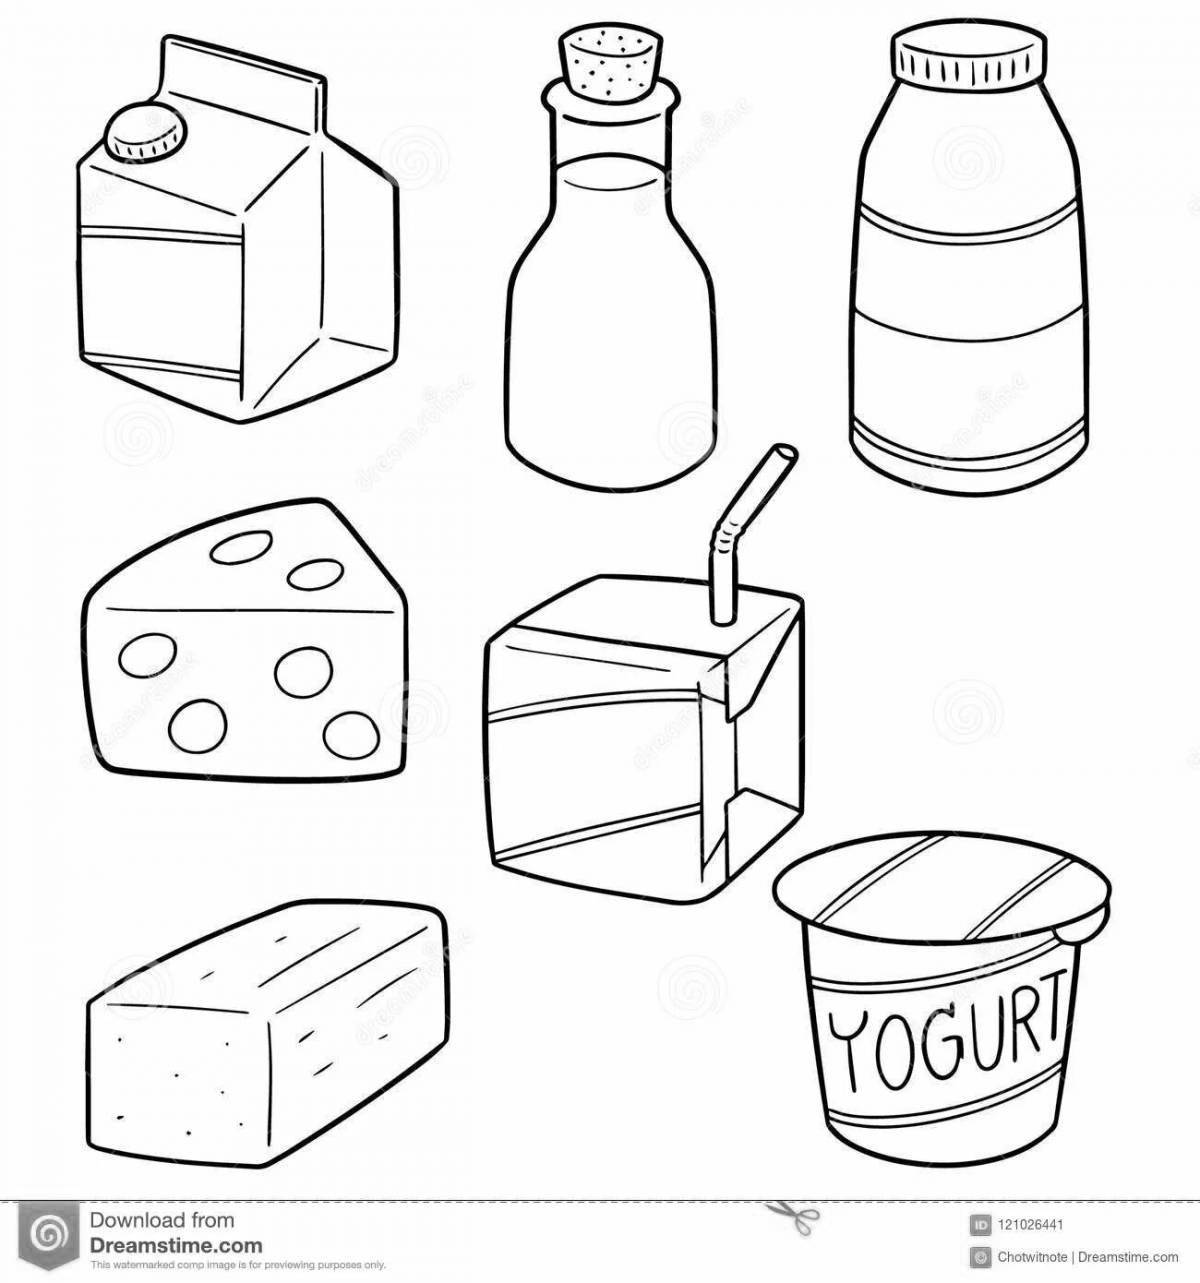 Shiny Dairy Coloring Page for Toddlers